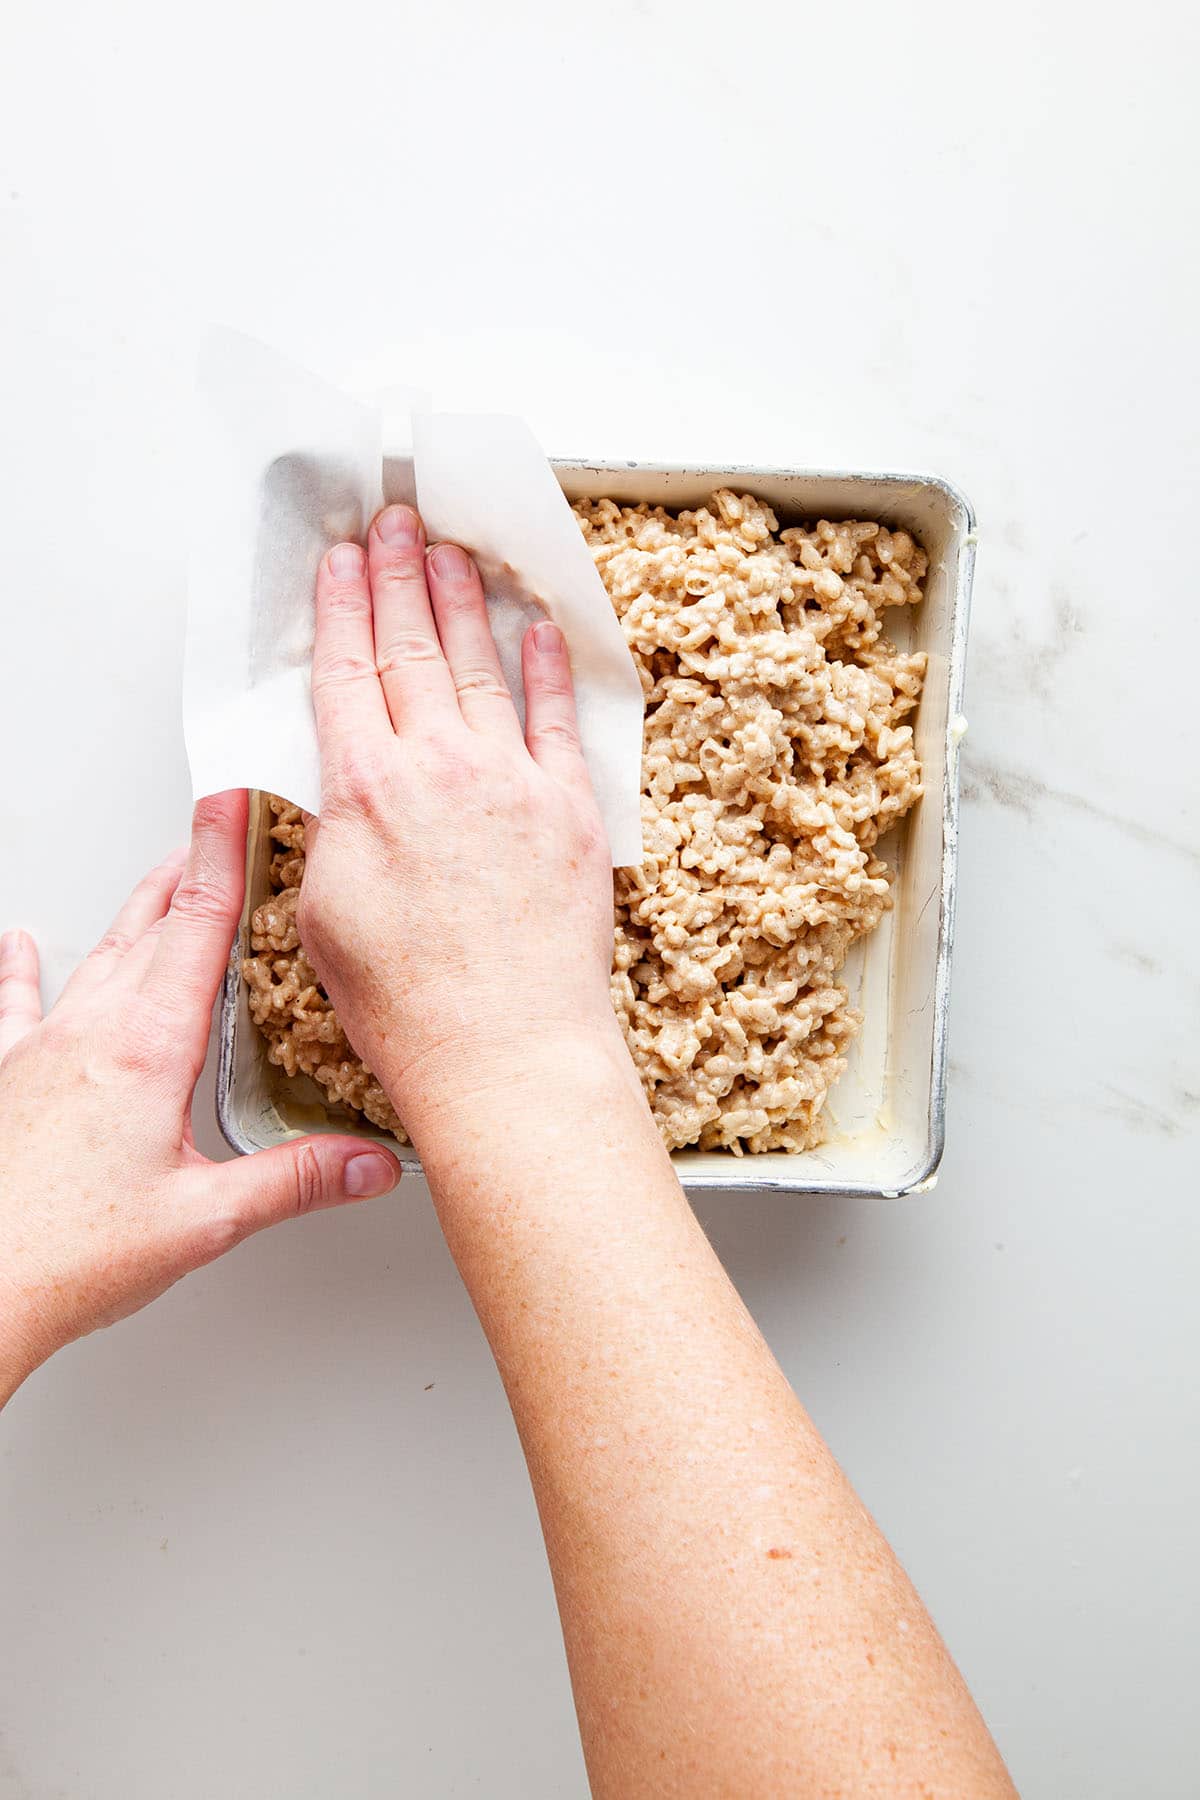 A hand smoothing the top of a pan of marshmallow treats with a small piece of parchment paper.